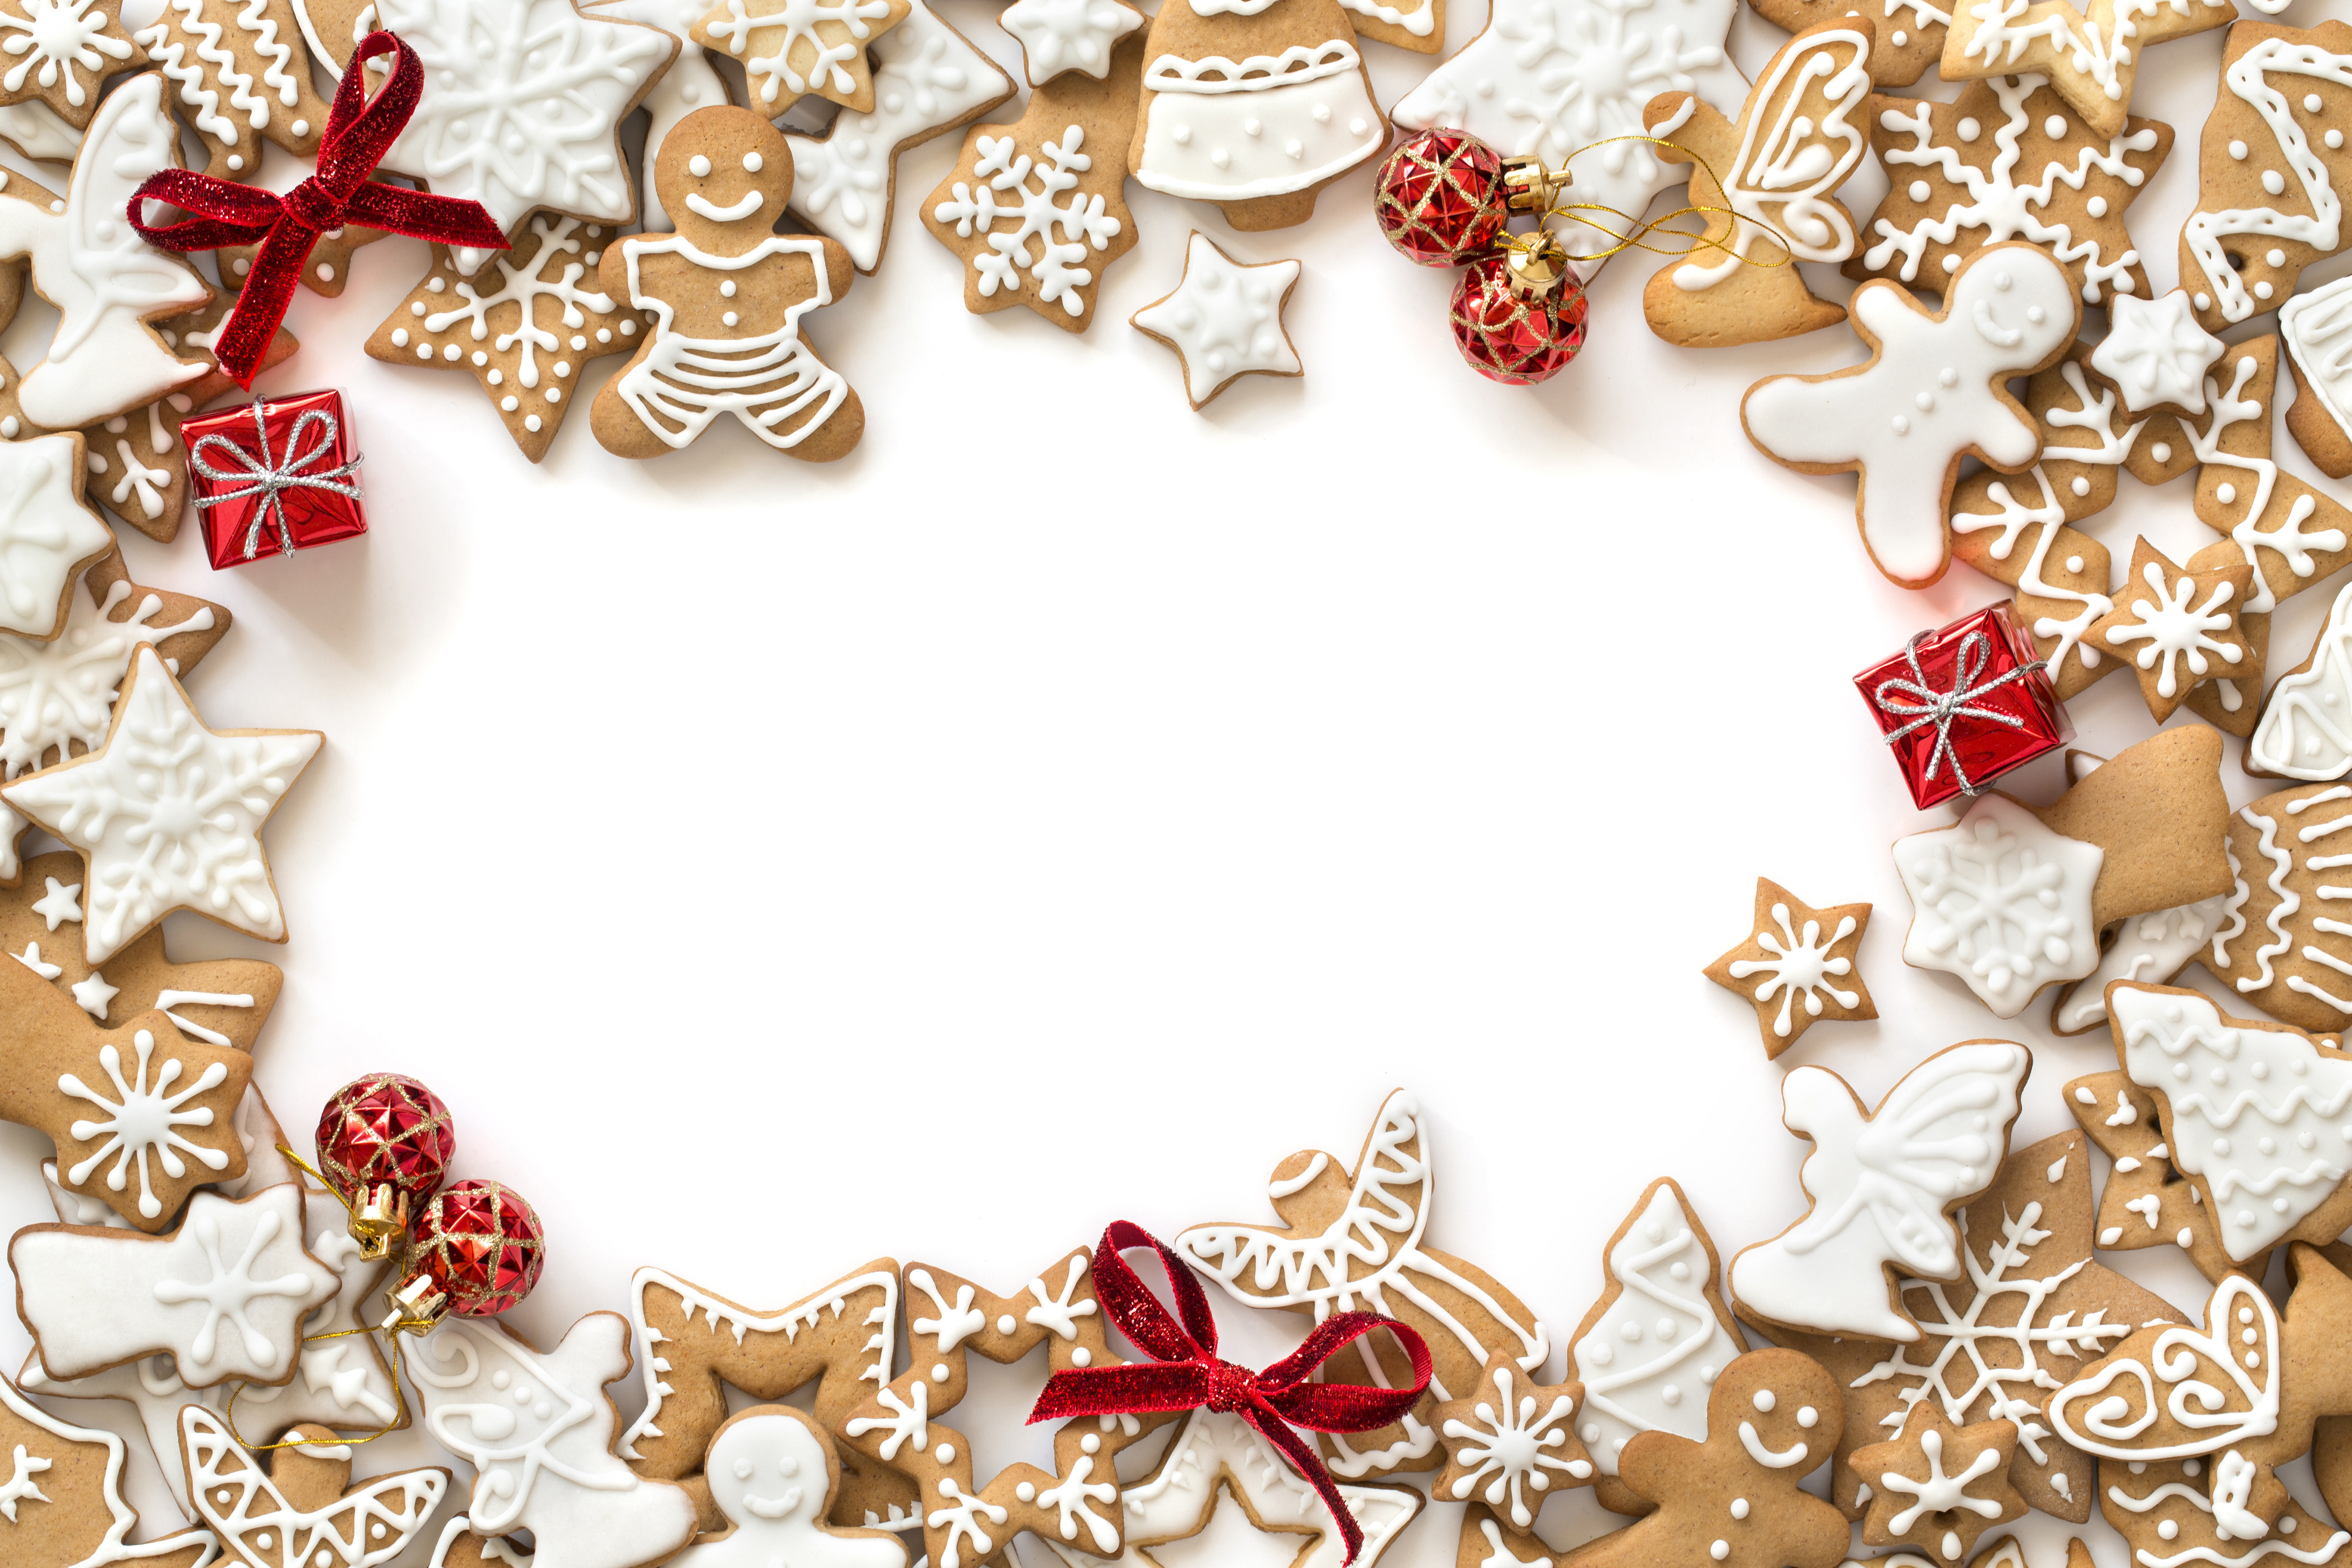 Christmas Baking Background
 Christmas Gingerbread Cookies Background